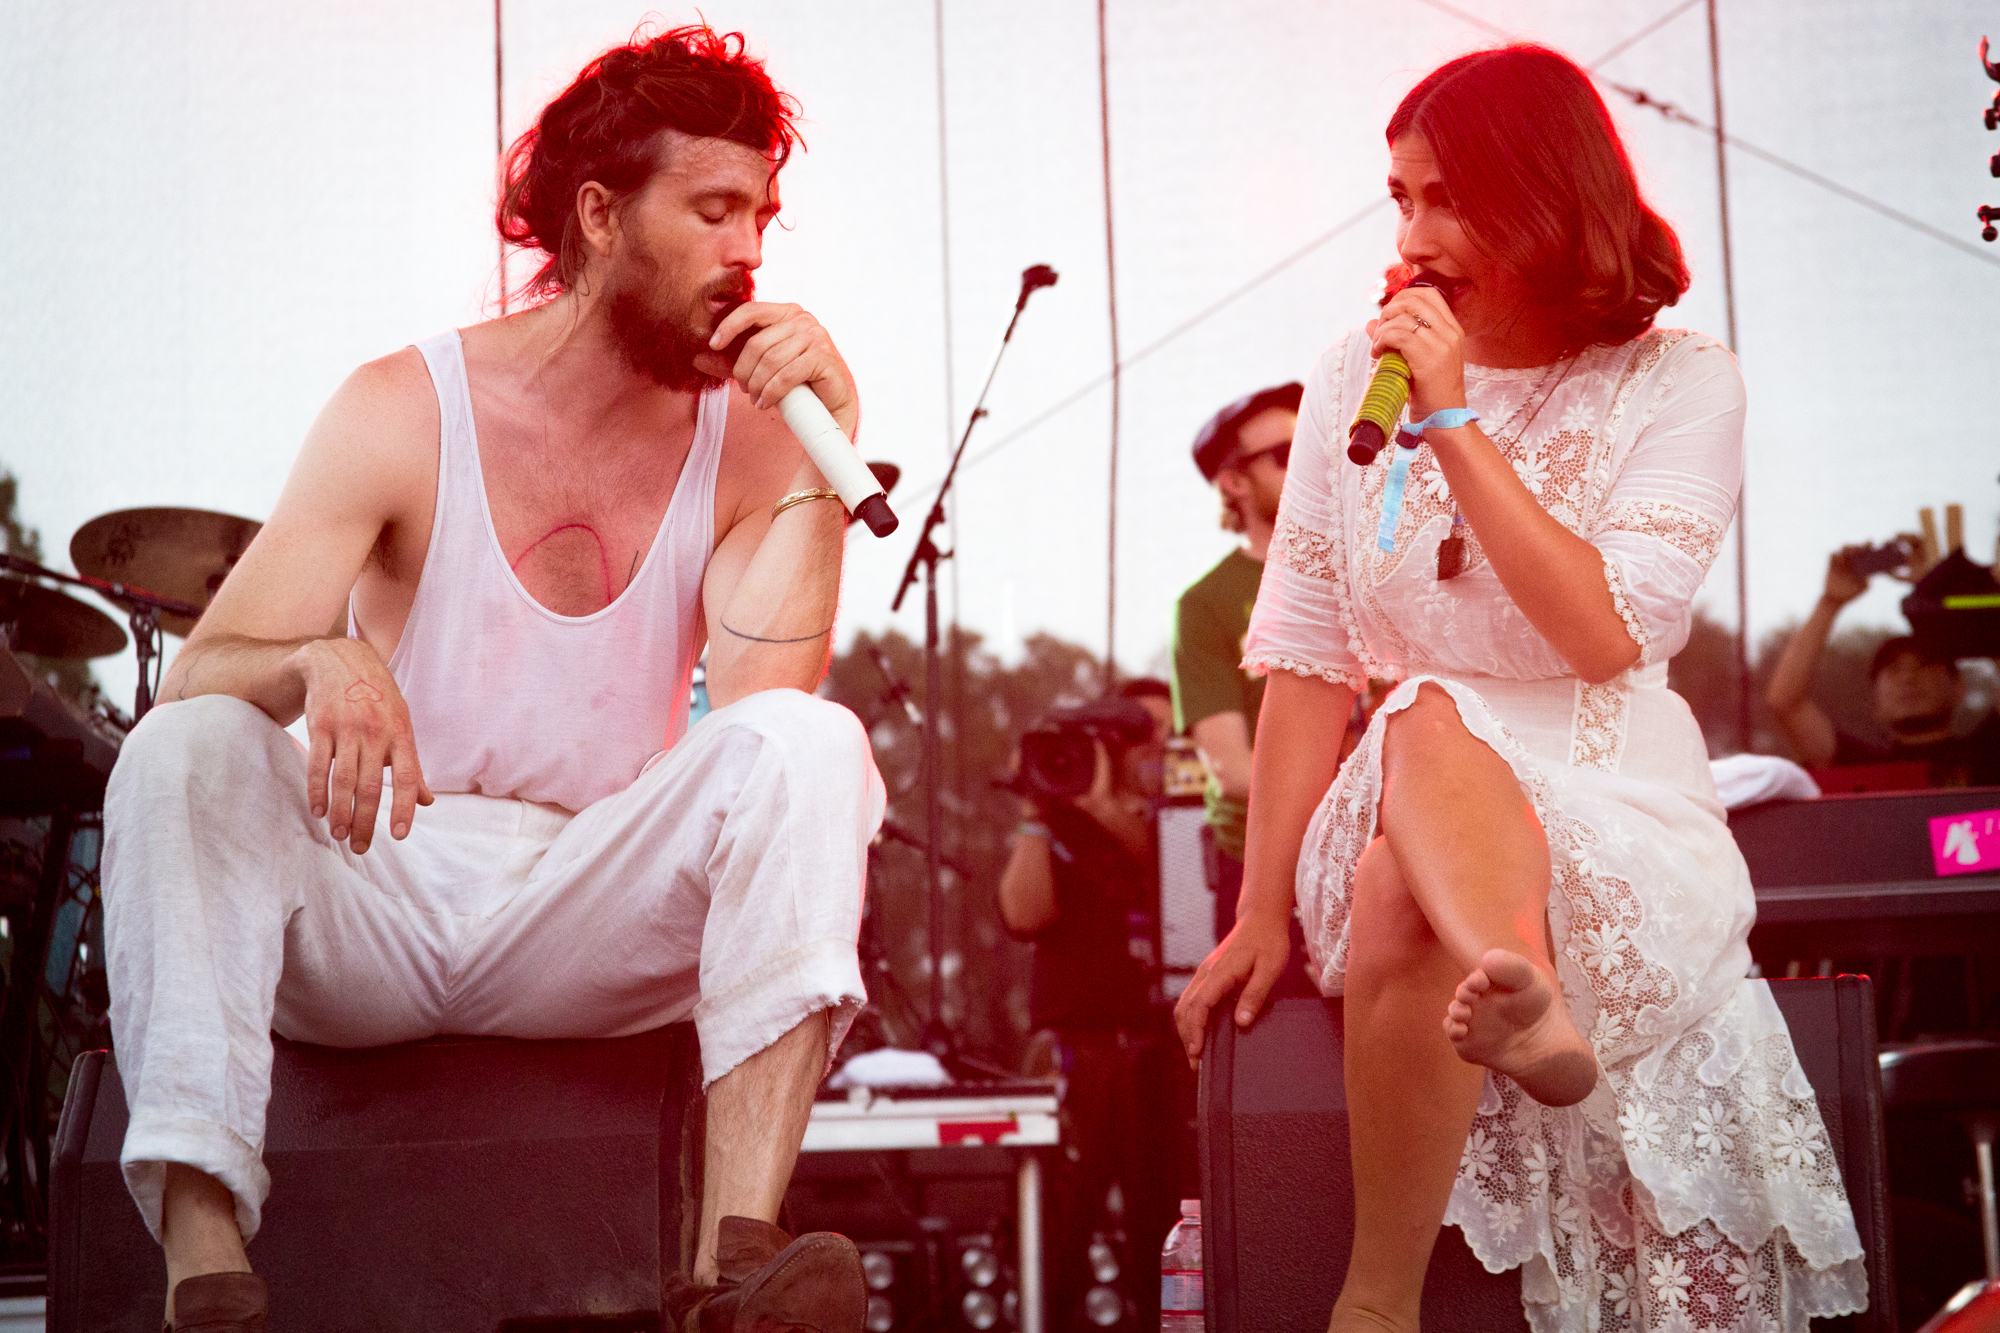 Edward Sharpe and the Magnetic Release Album Without Jade The Amherst Student